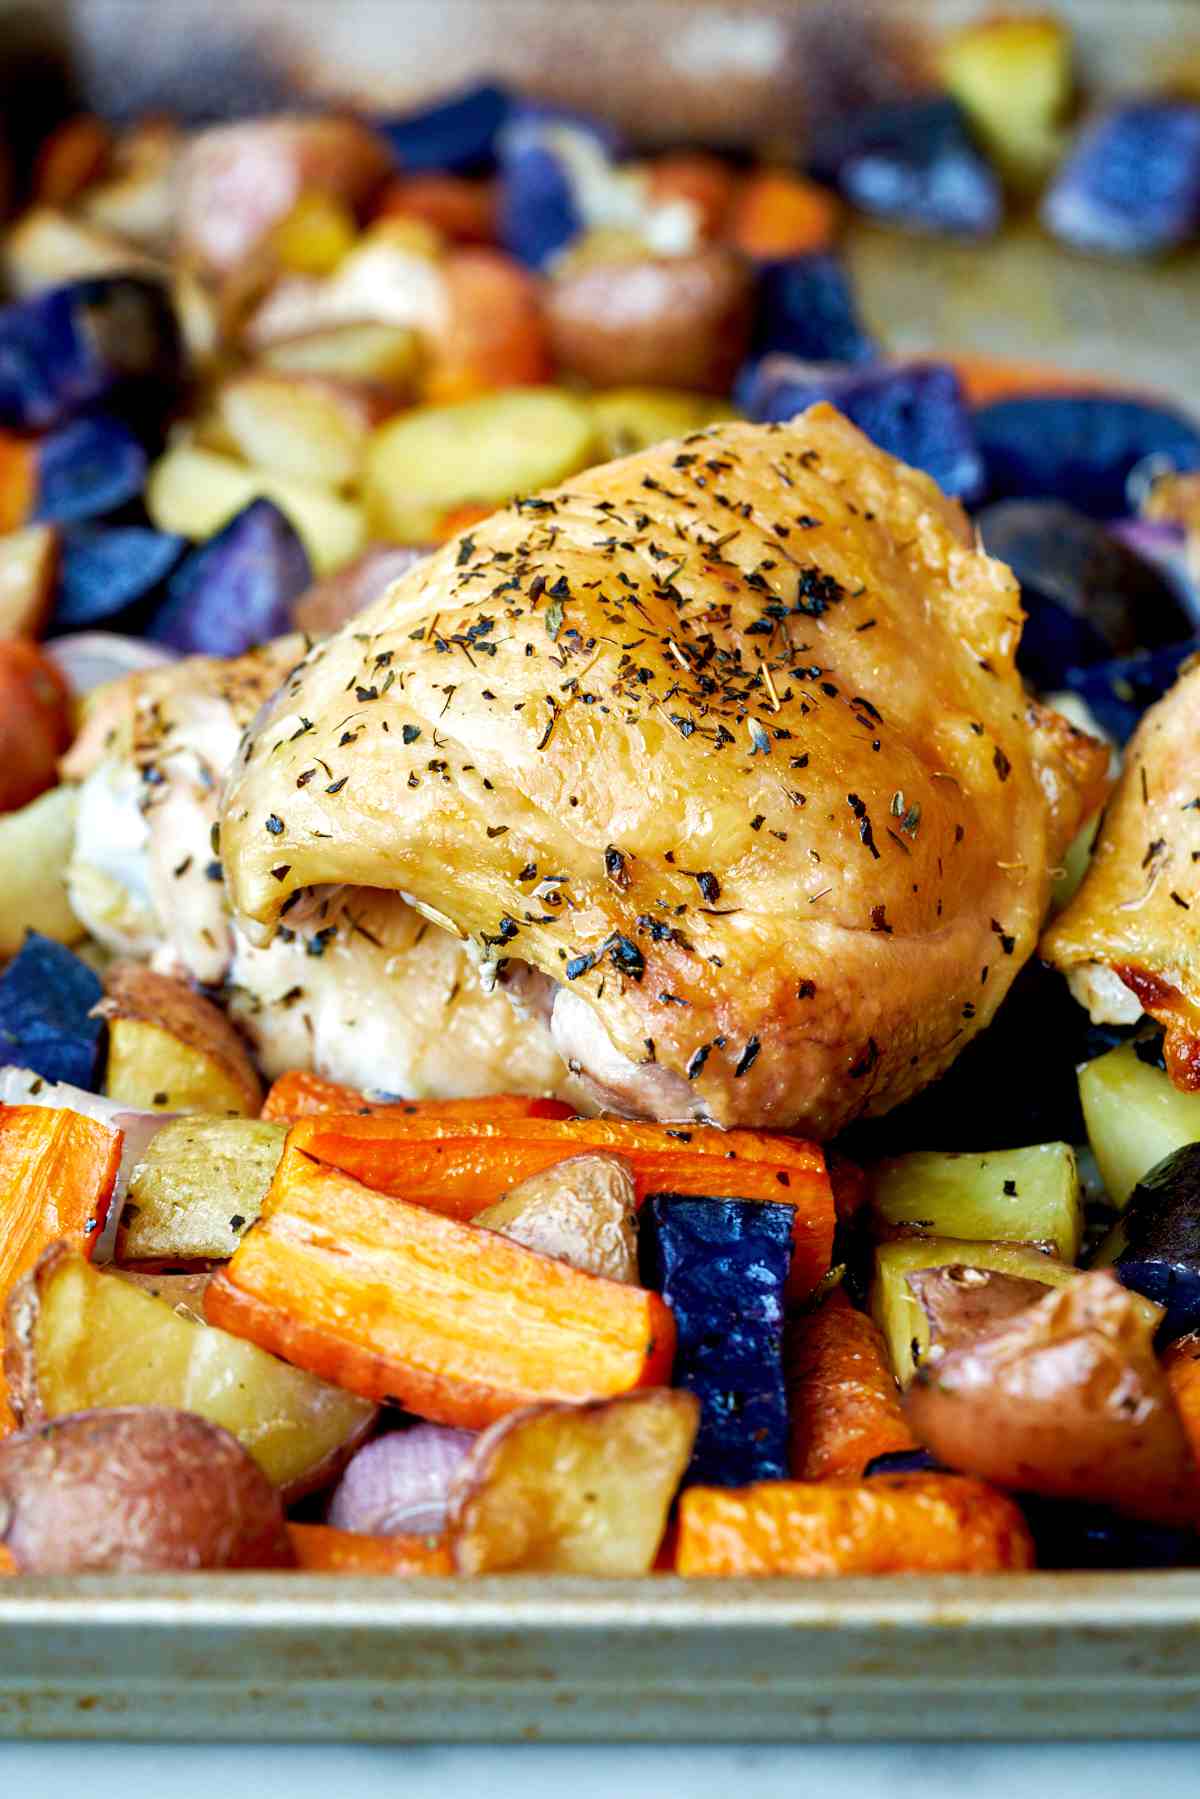 Cooked chicken thigh and root vegetables.